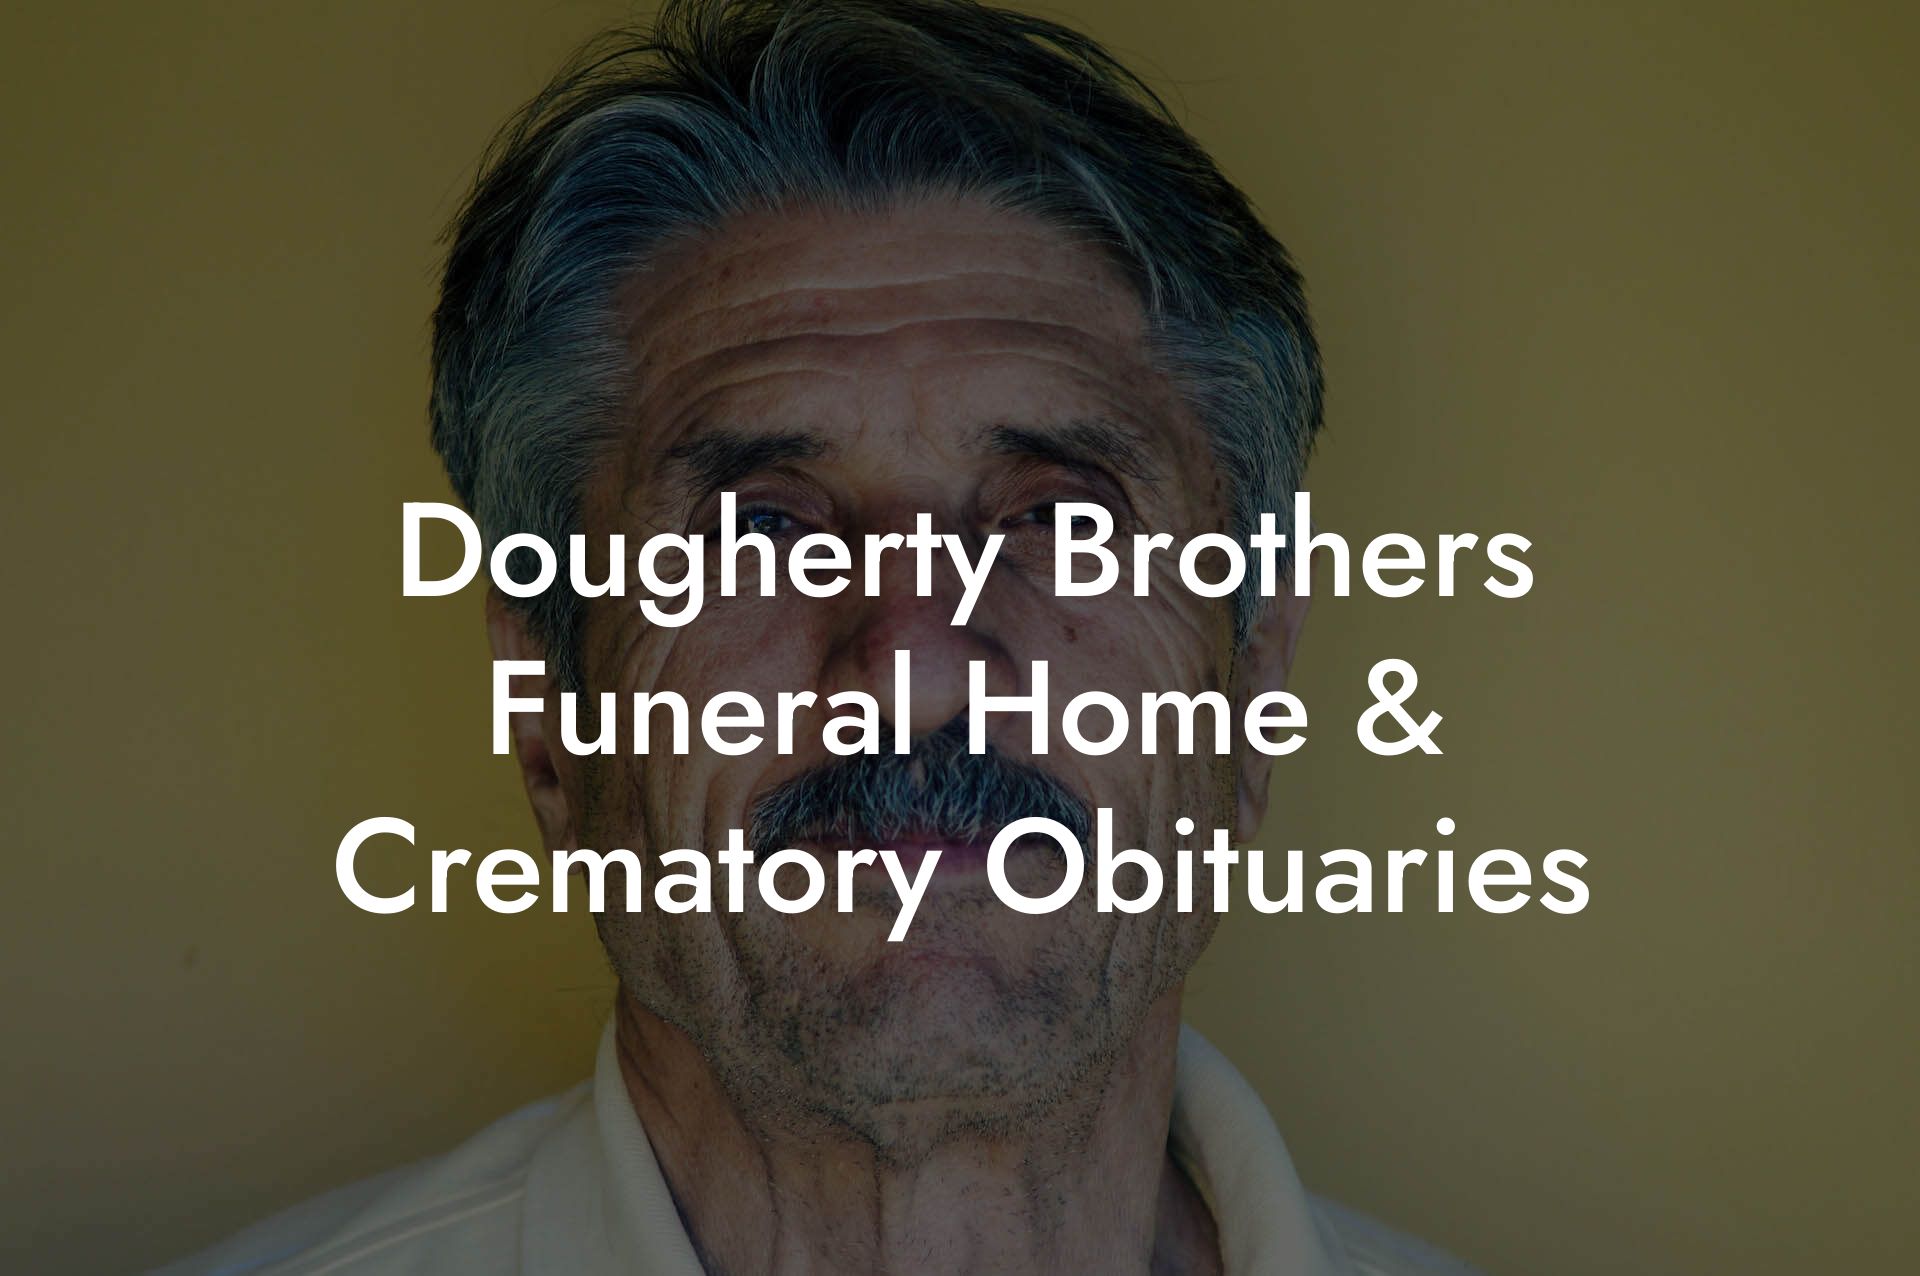 Dougherty Brothers Funeral Home & Crematory Obituaries